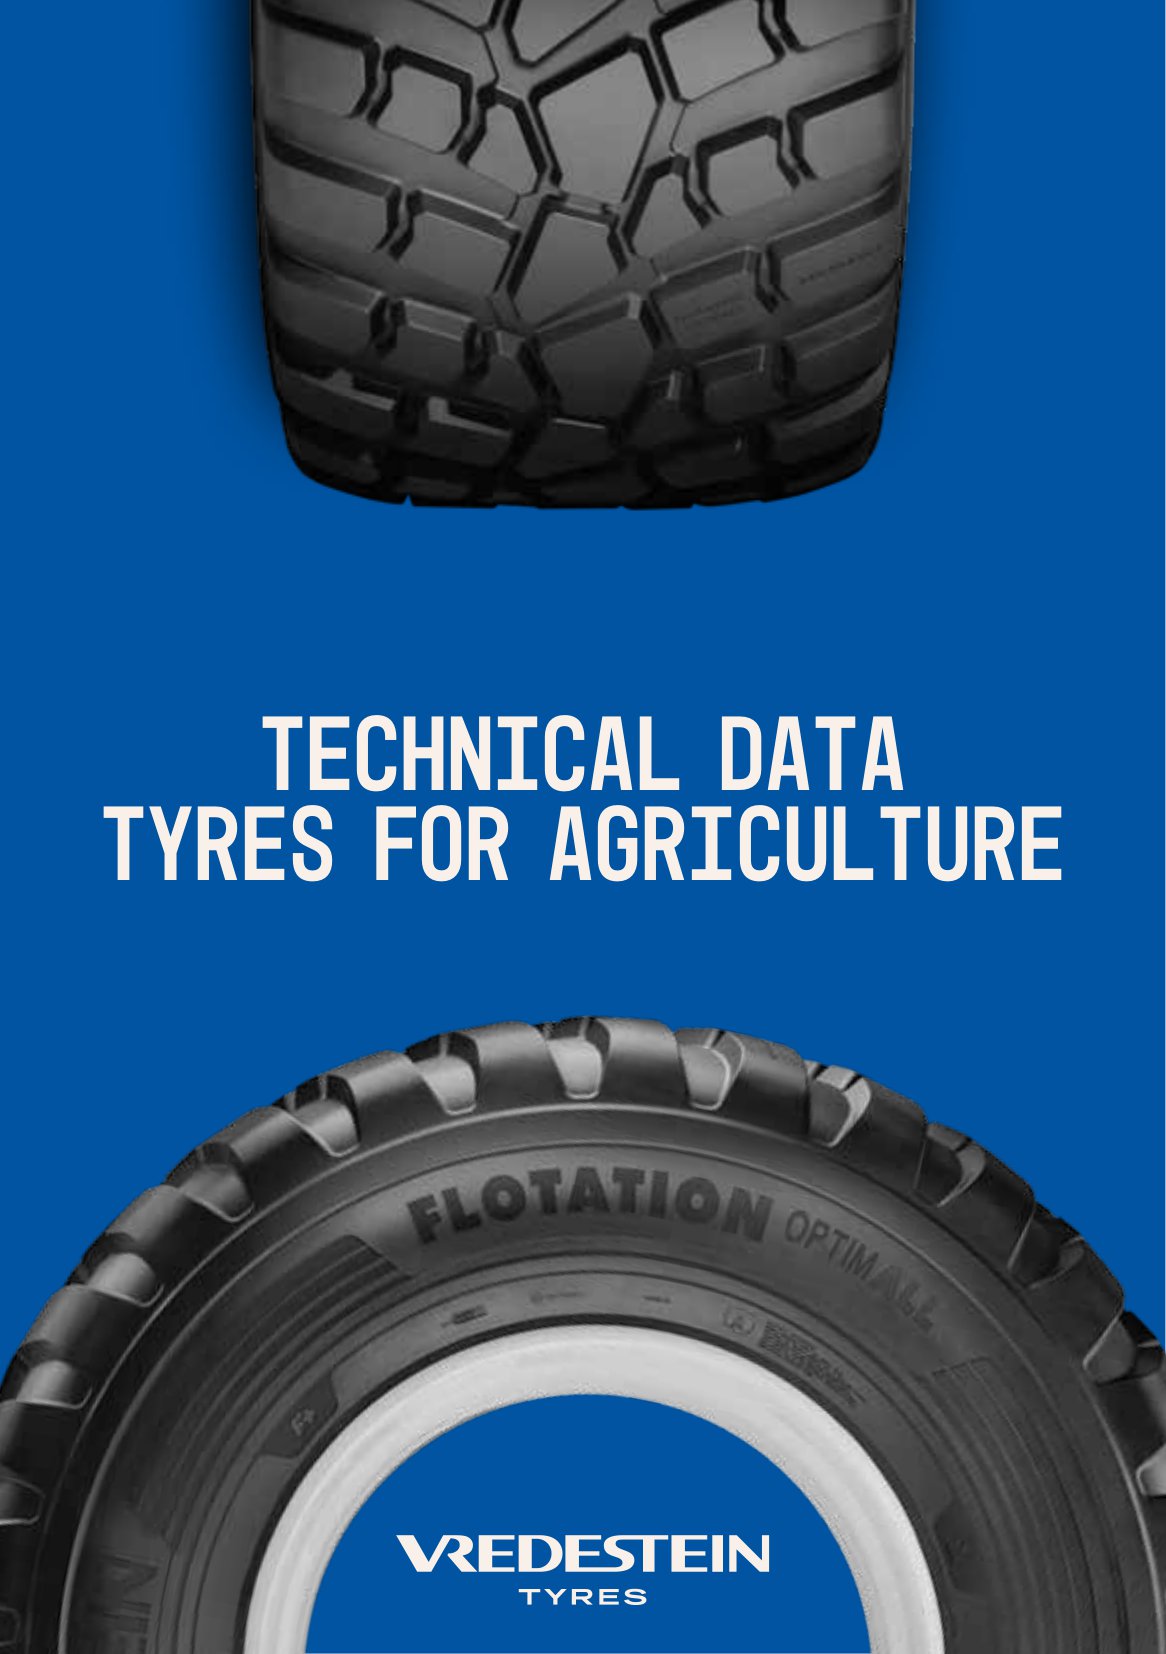 Tyres for Agriculture